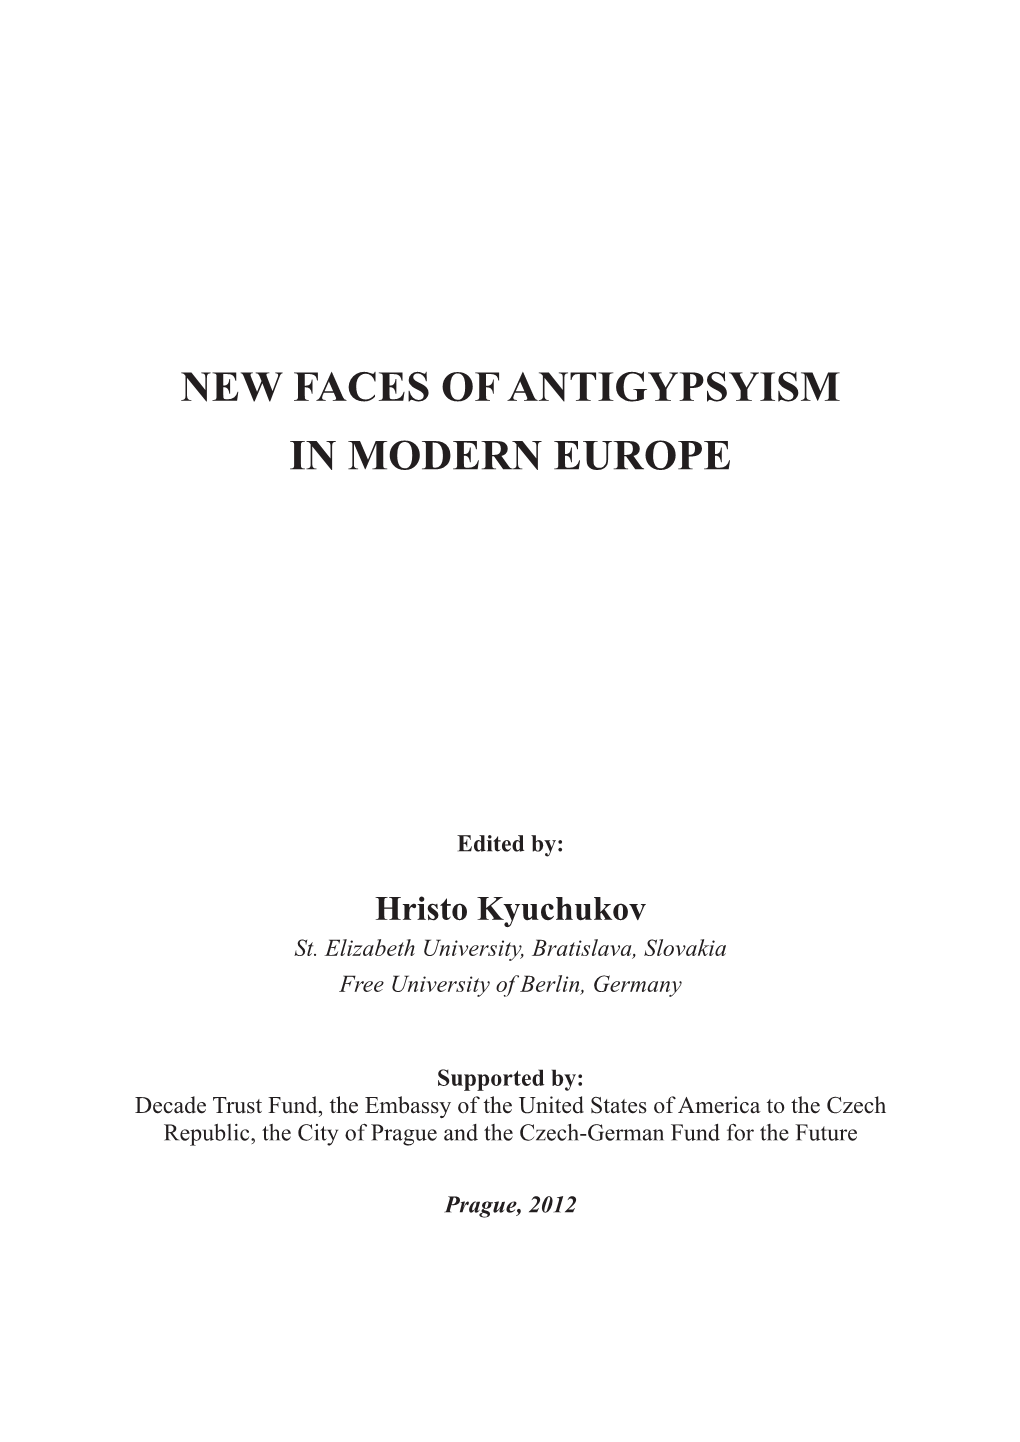 New Faces of Antigypsyism in Modern Europe